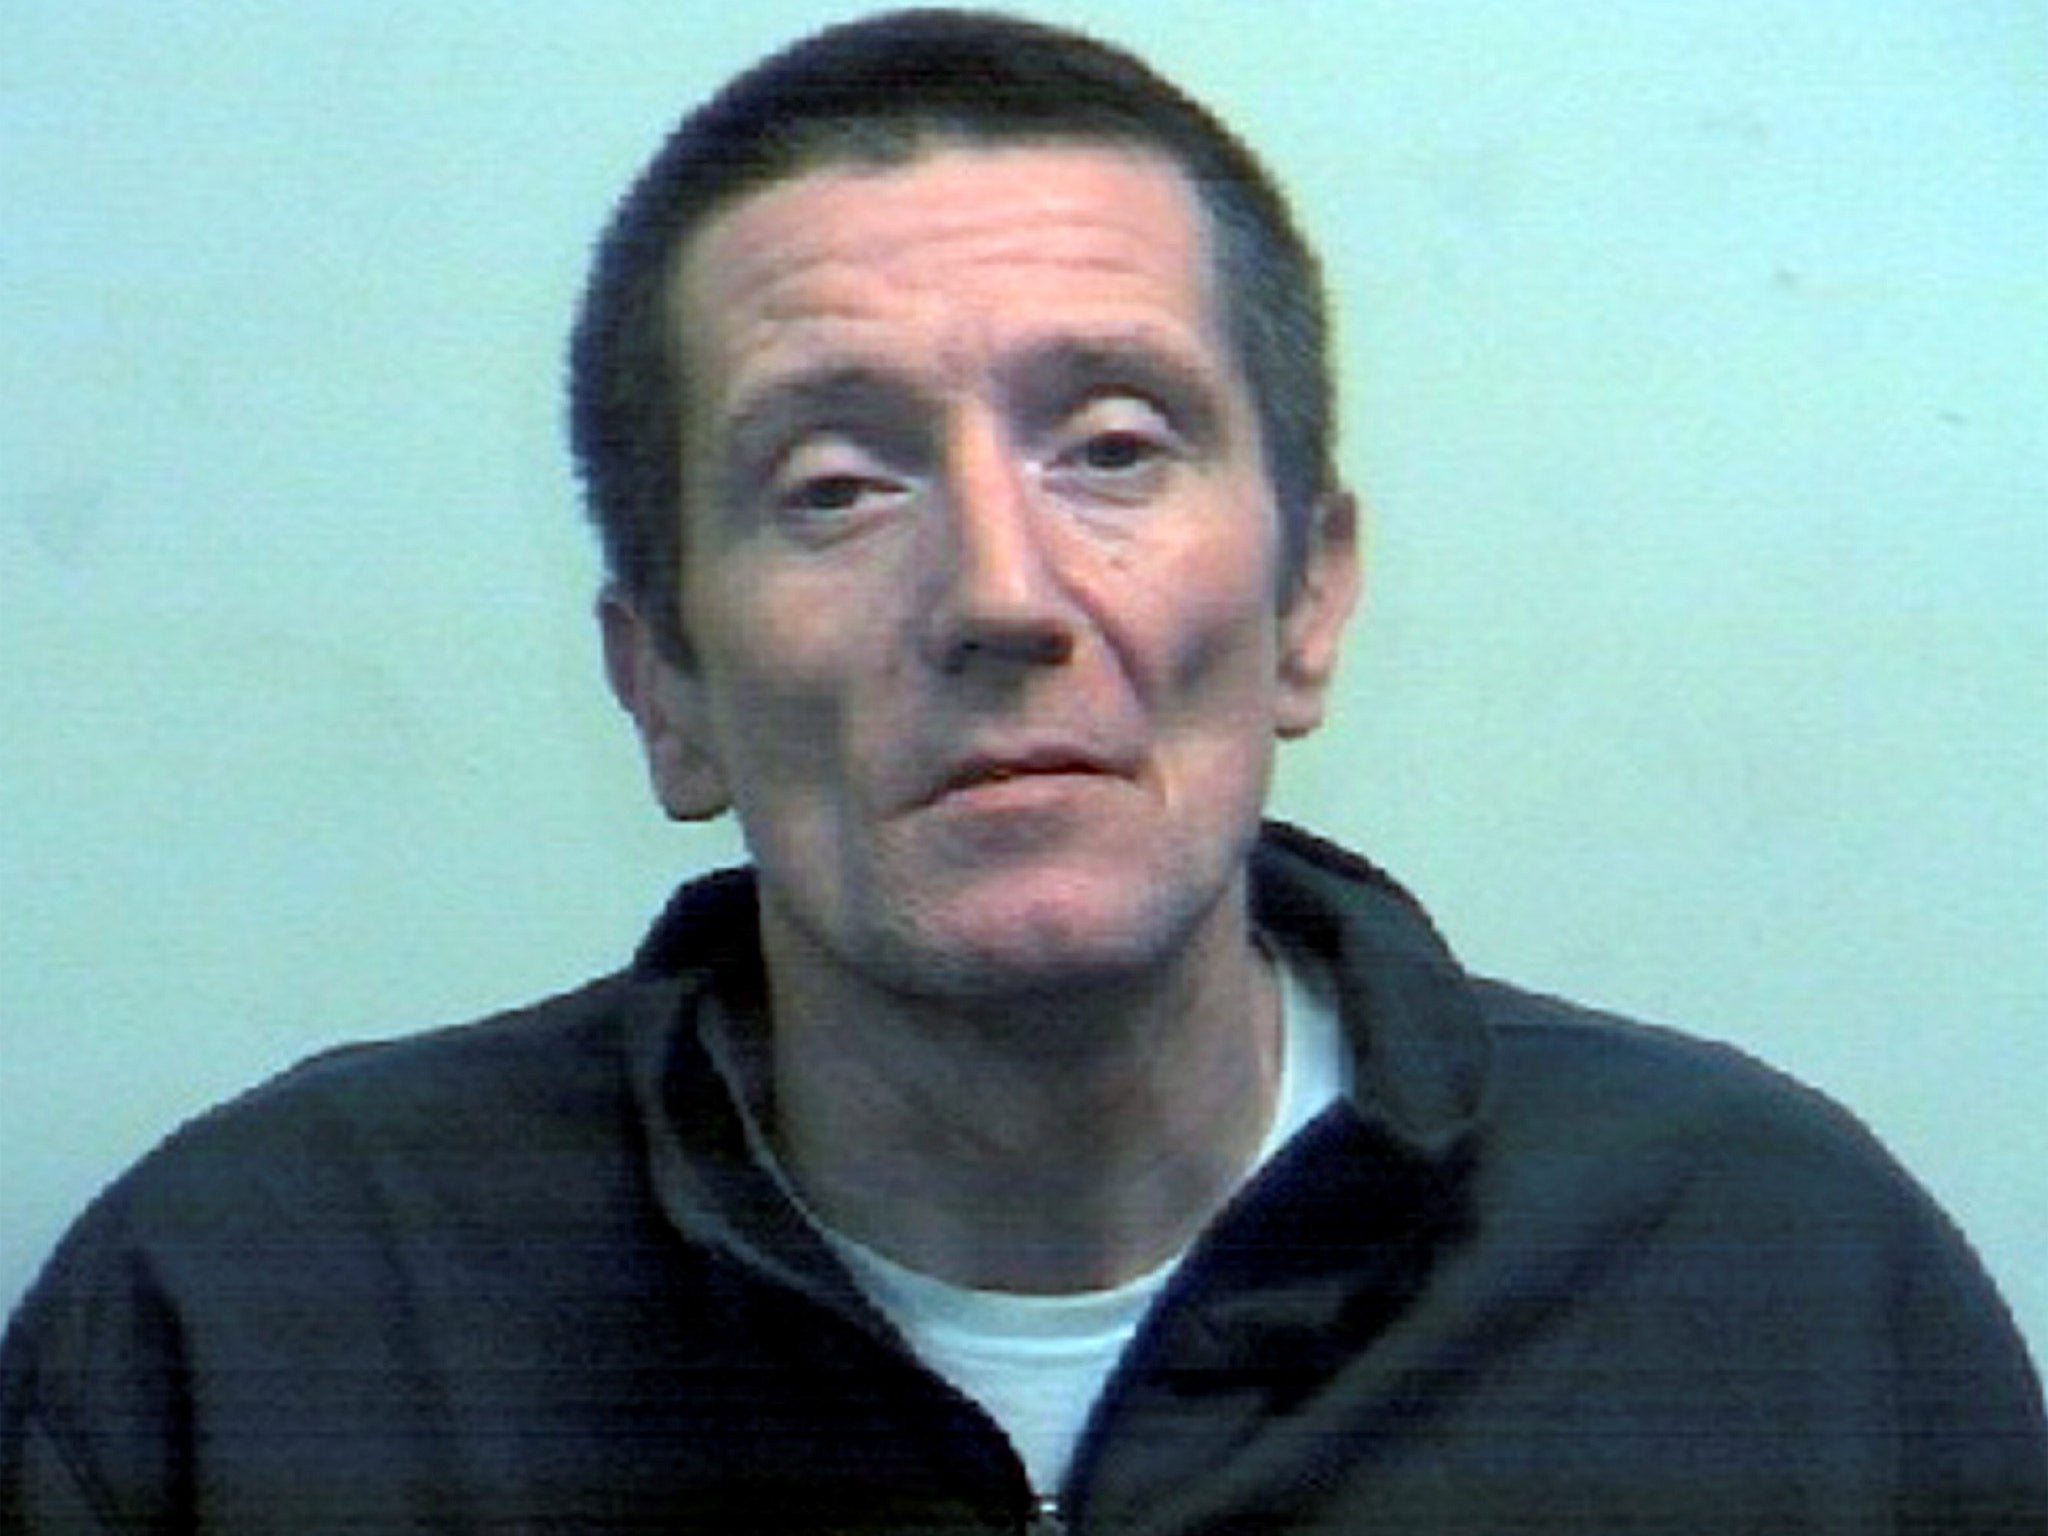 Darrell Burbeary went missing from HMP Hatfield in Doncaster last month